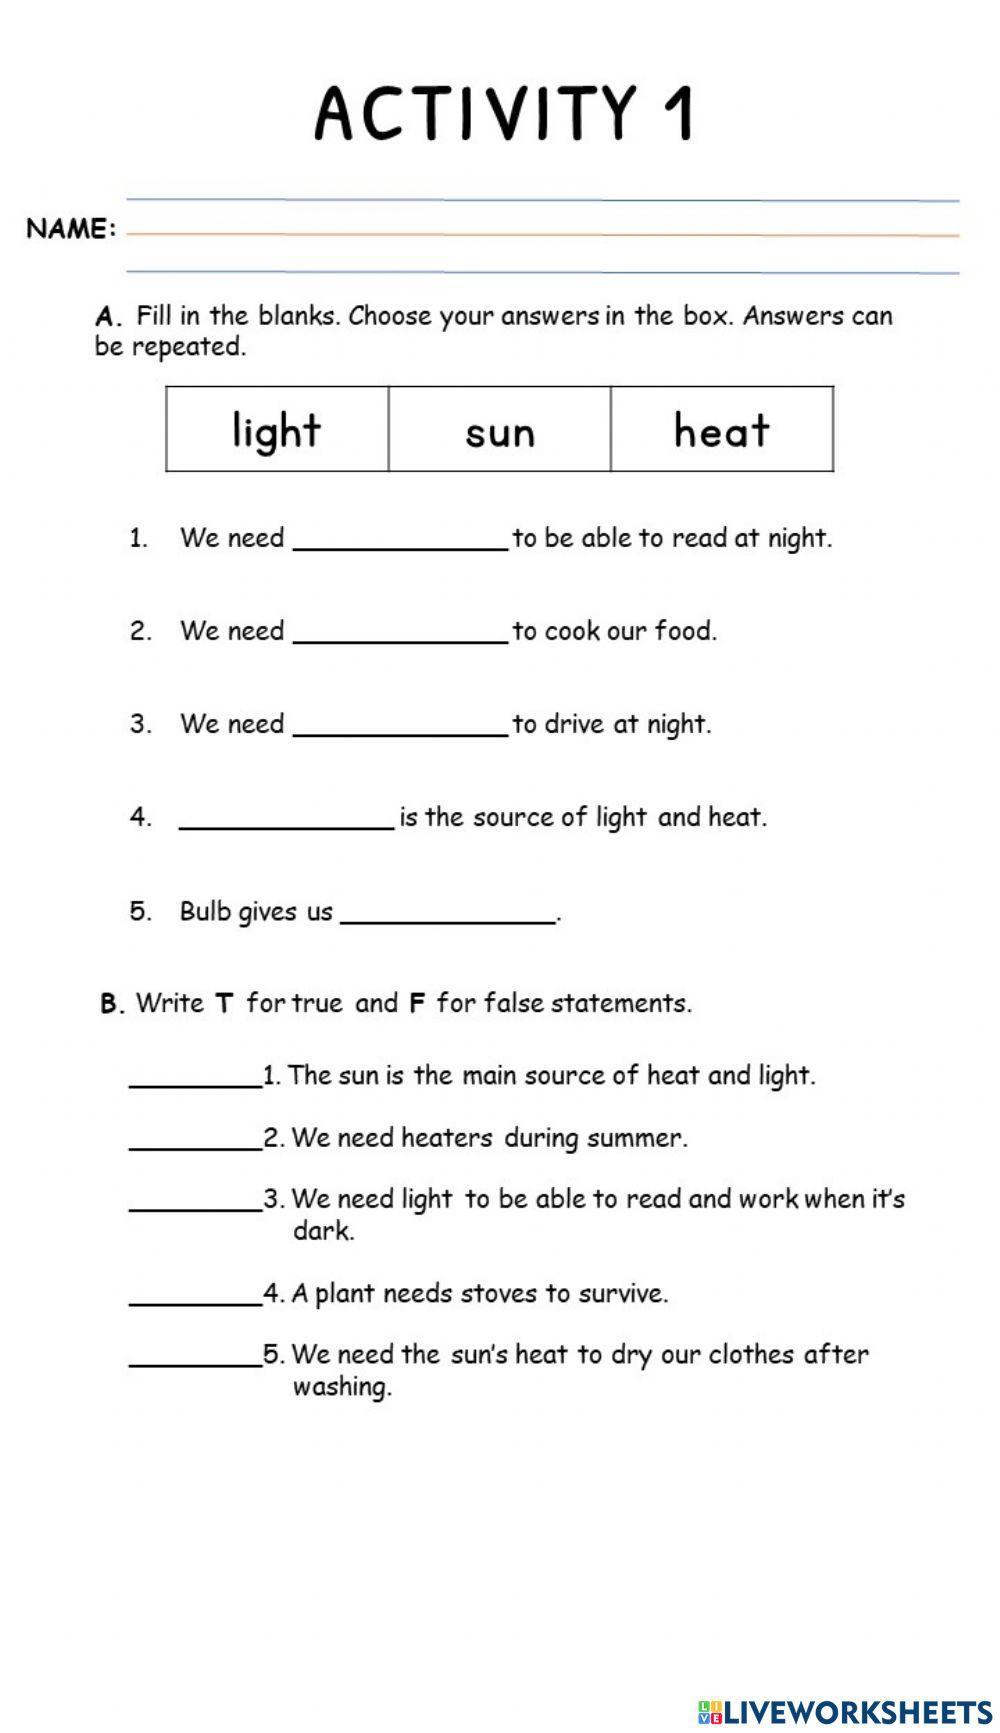 A1-Q4W2-Lesson 22 - Sources and Uses of Light and Heat Energy-ACTIVITIES